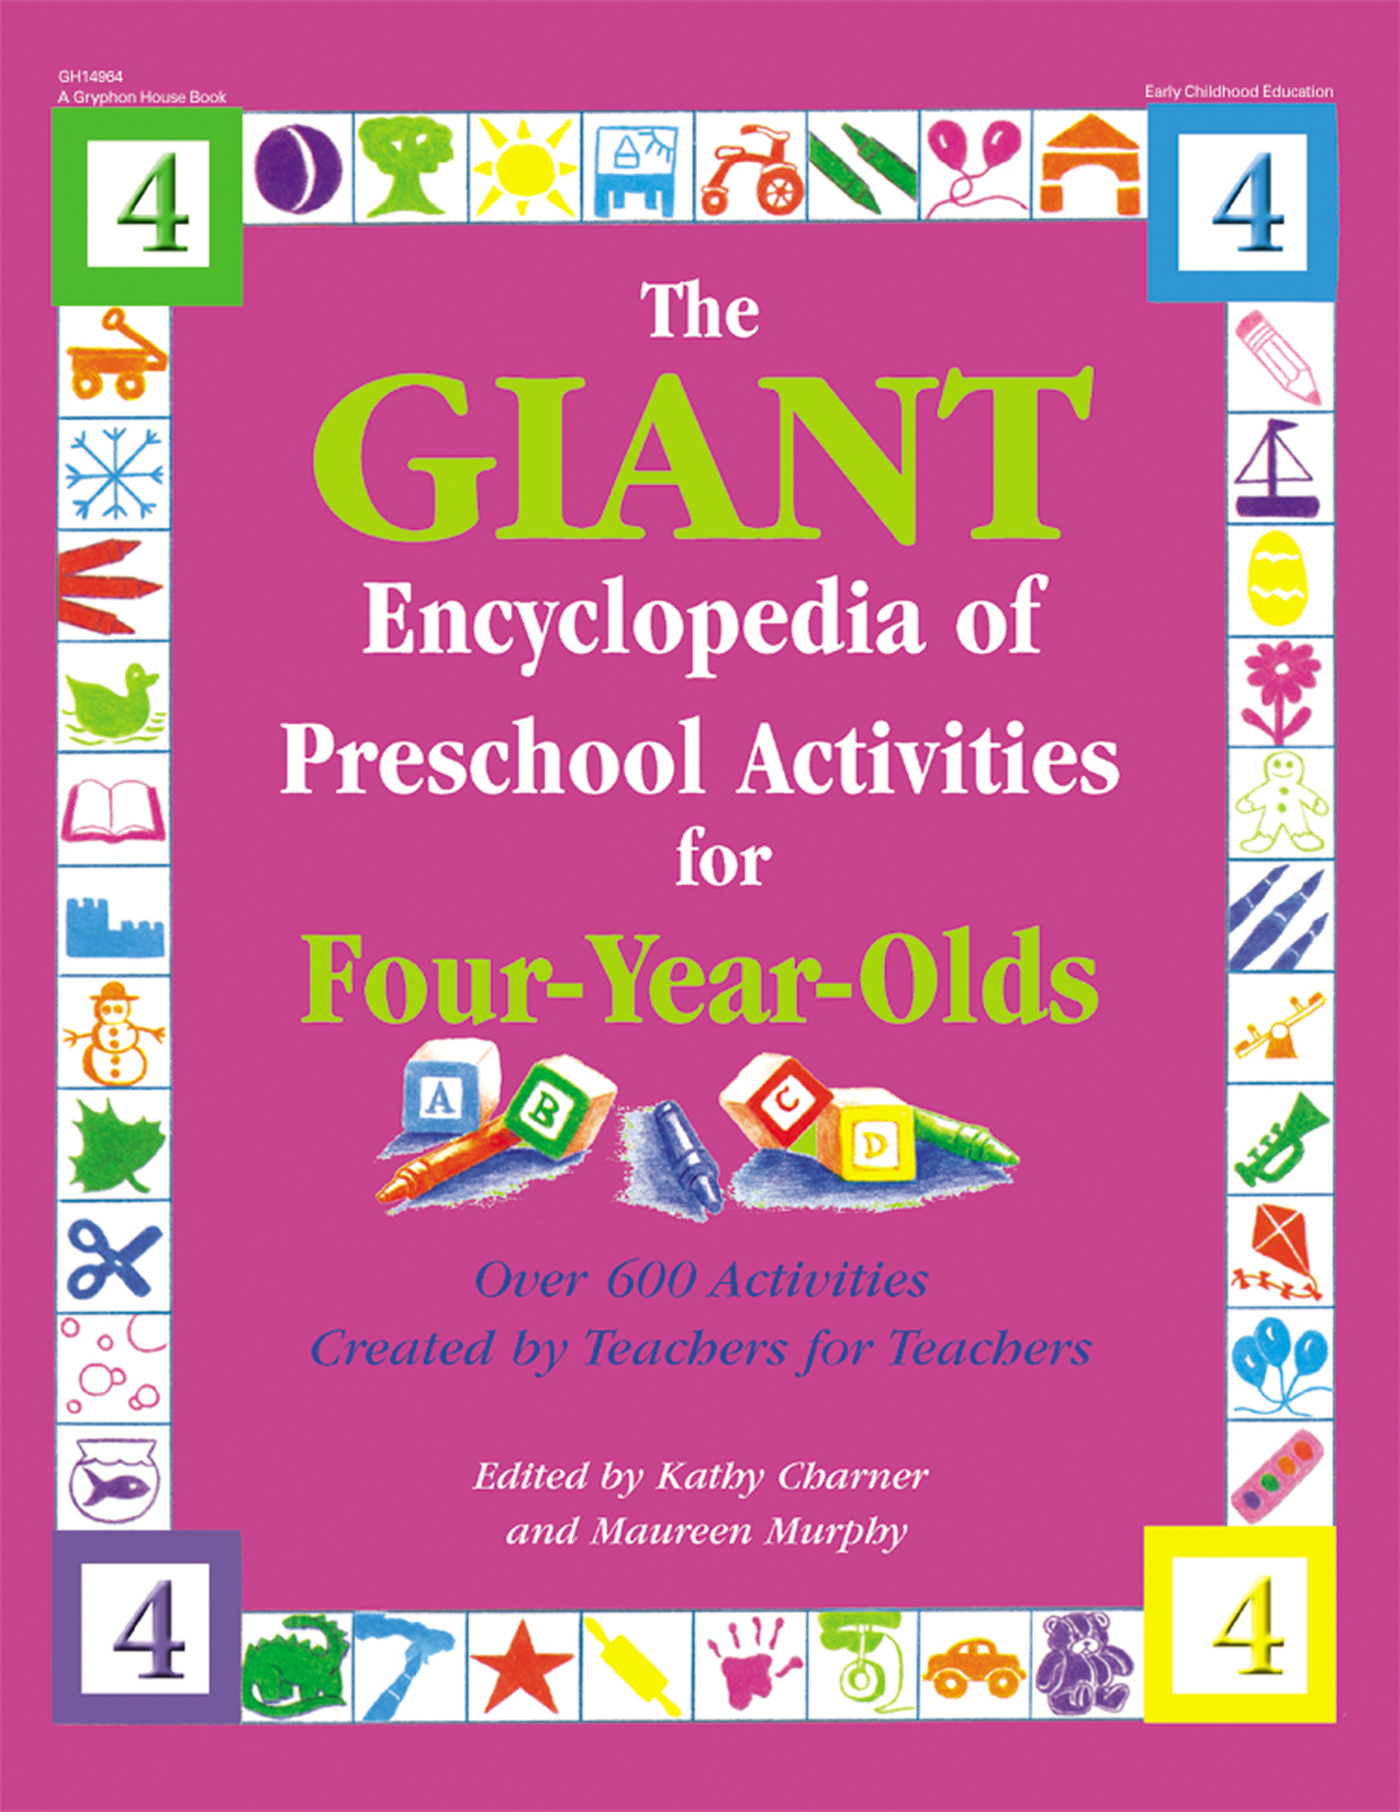 The GIANT Encyclopedia of Preschool Activities for 4-Year-Olds